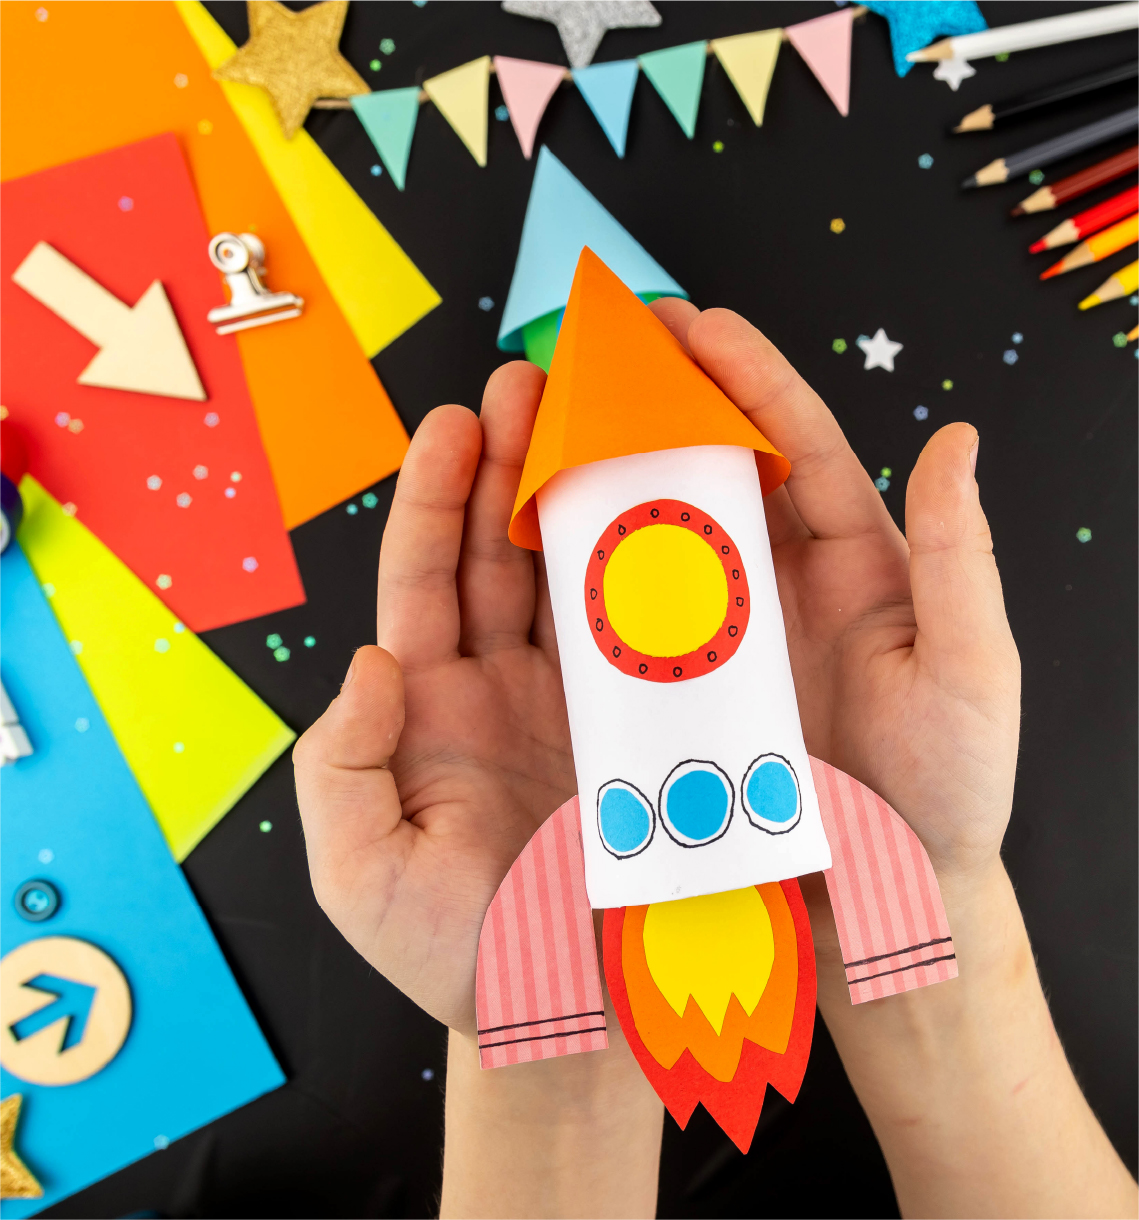 Hand-crafted rocketship with construction paper visible in the background